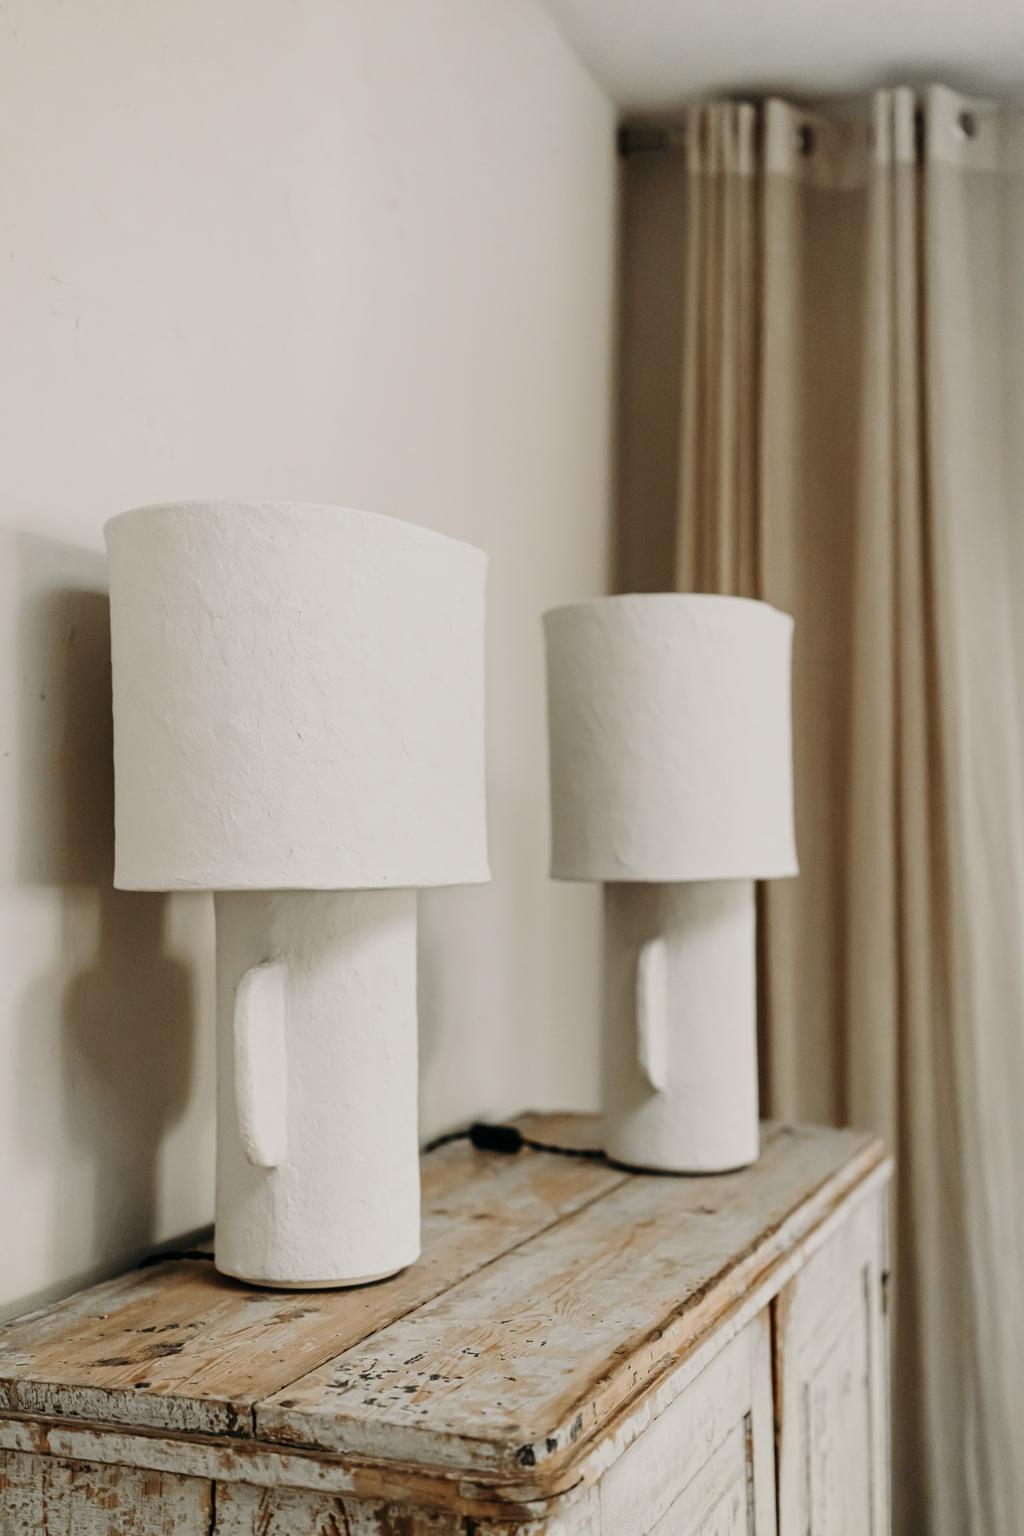 Belgian Pair of White Papier Mâché Table Lamps with ovalshaped lampshade 